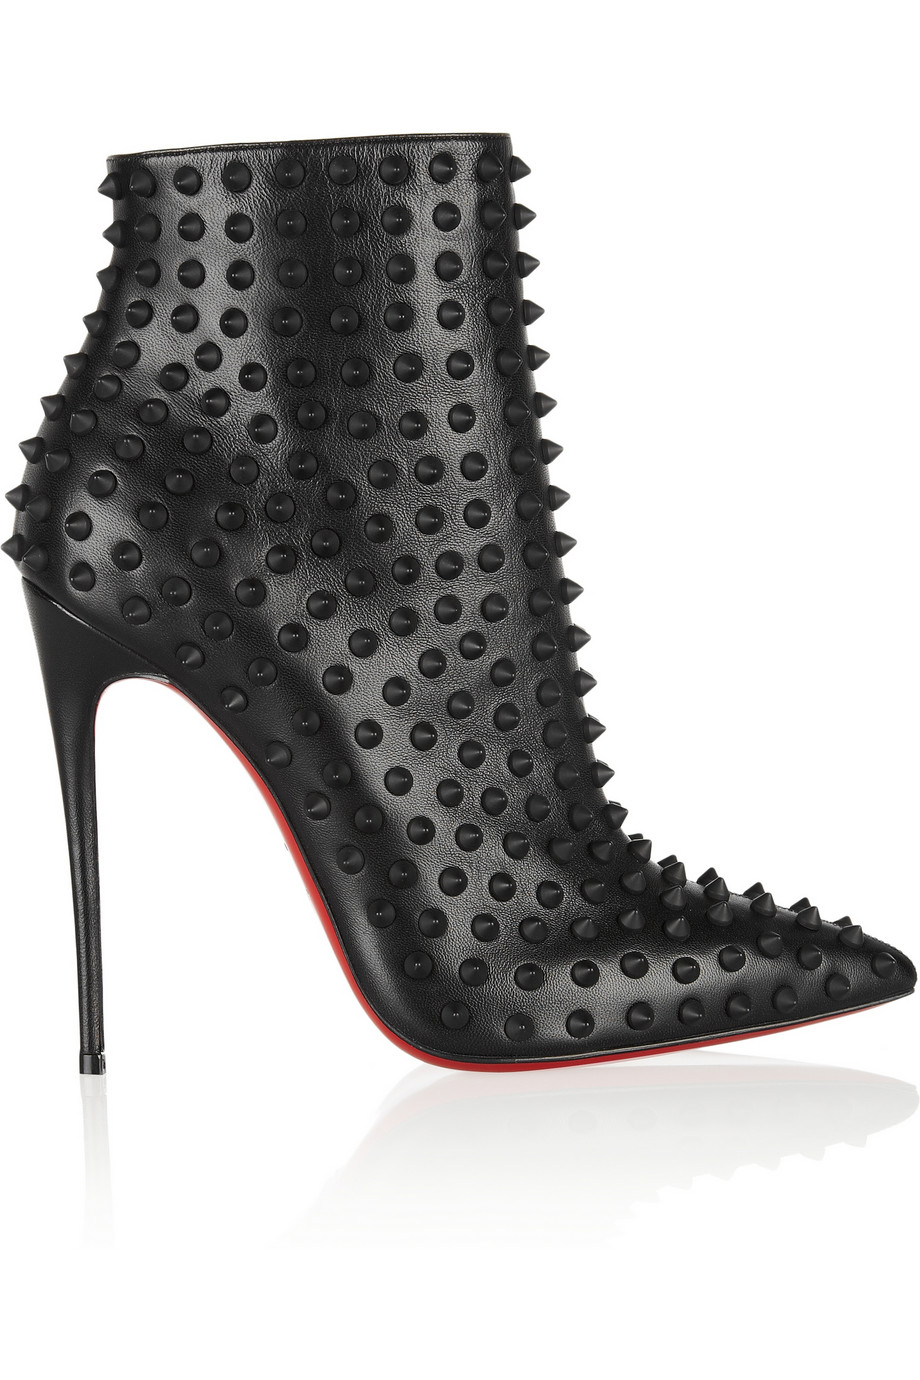 Christian Louboutin Snakilta 120 Spiked Leather Ankle Boots in Black - Lyst